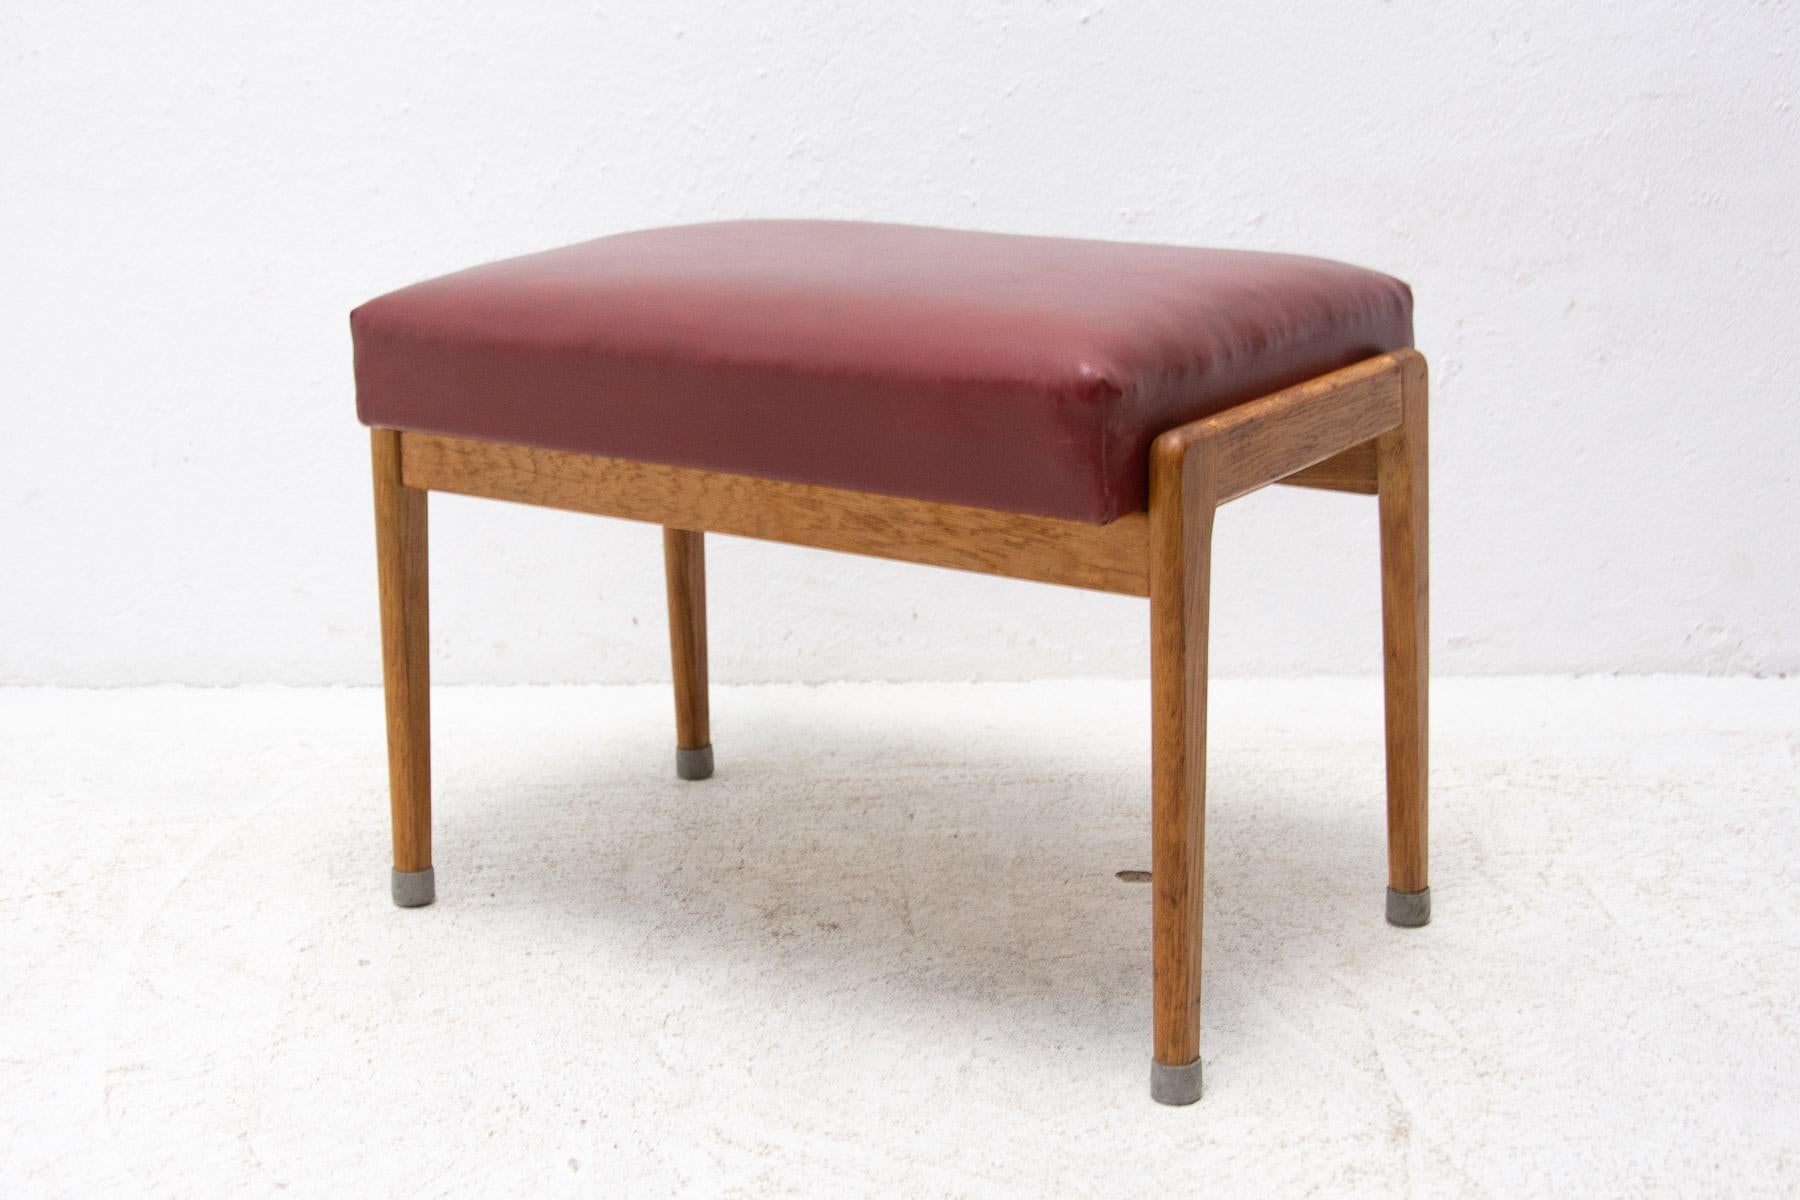 This stool/footrest was made by ULUV in the former Czechoslovakia in the 1960´s.

Features a leatherette seat and the structure is made of beech wood. In very good original condition, showing signs of age and using.

 

Measures: Height: 37